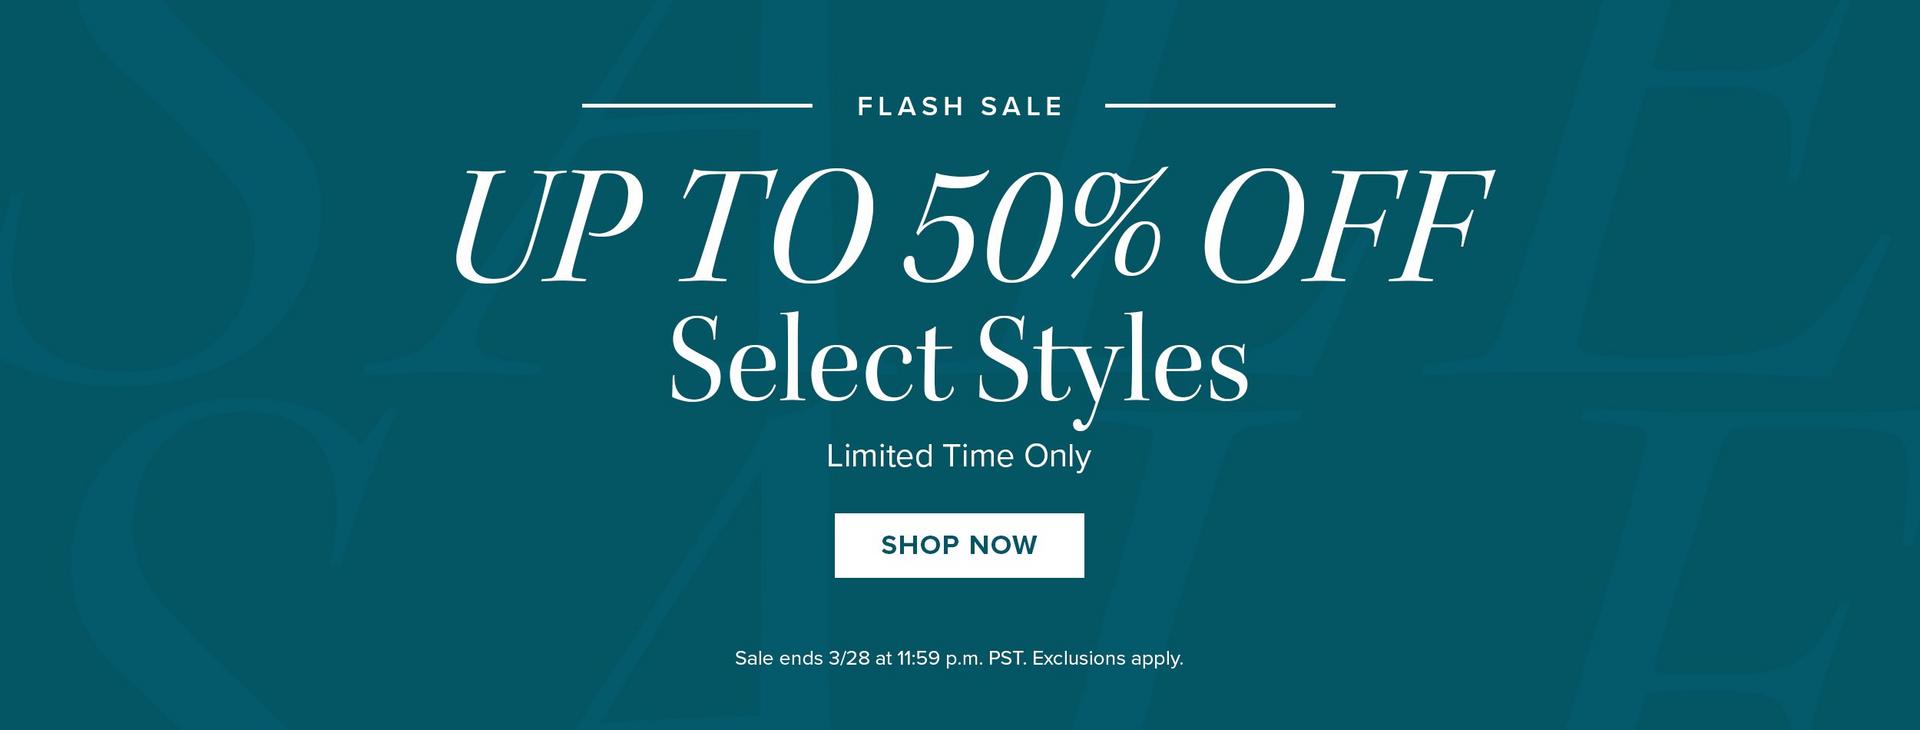 Flash Sale - Up to 50% Off Select Styles, Limited Time Only